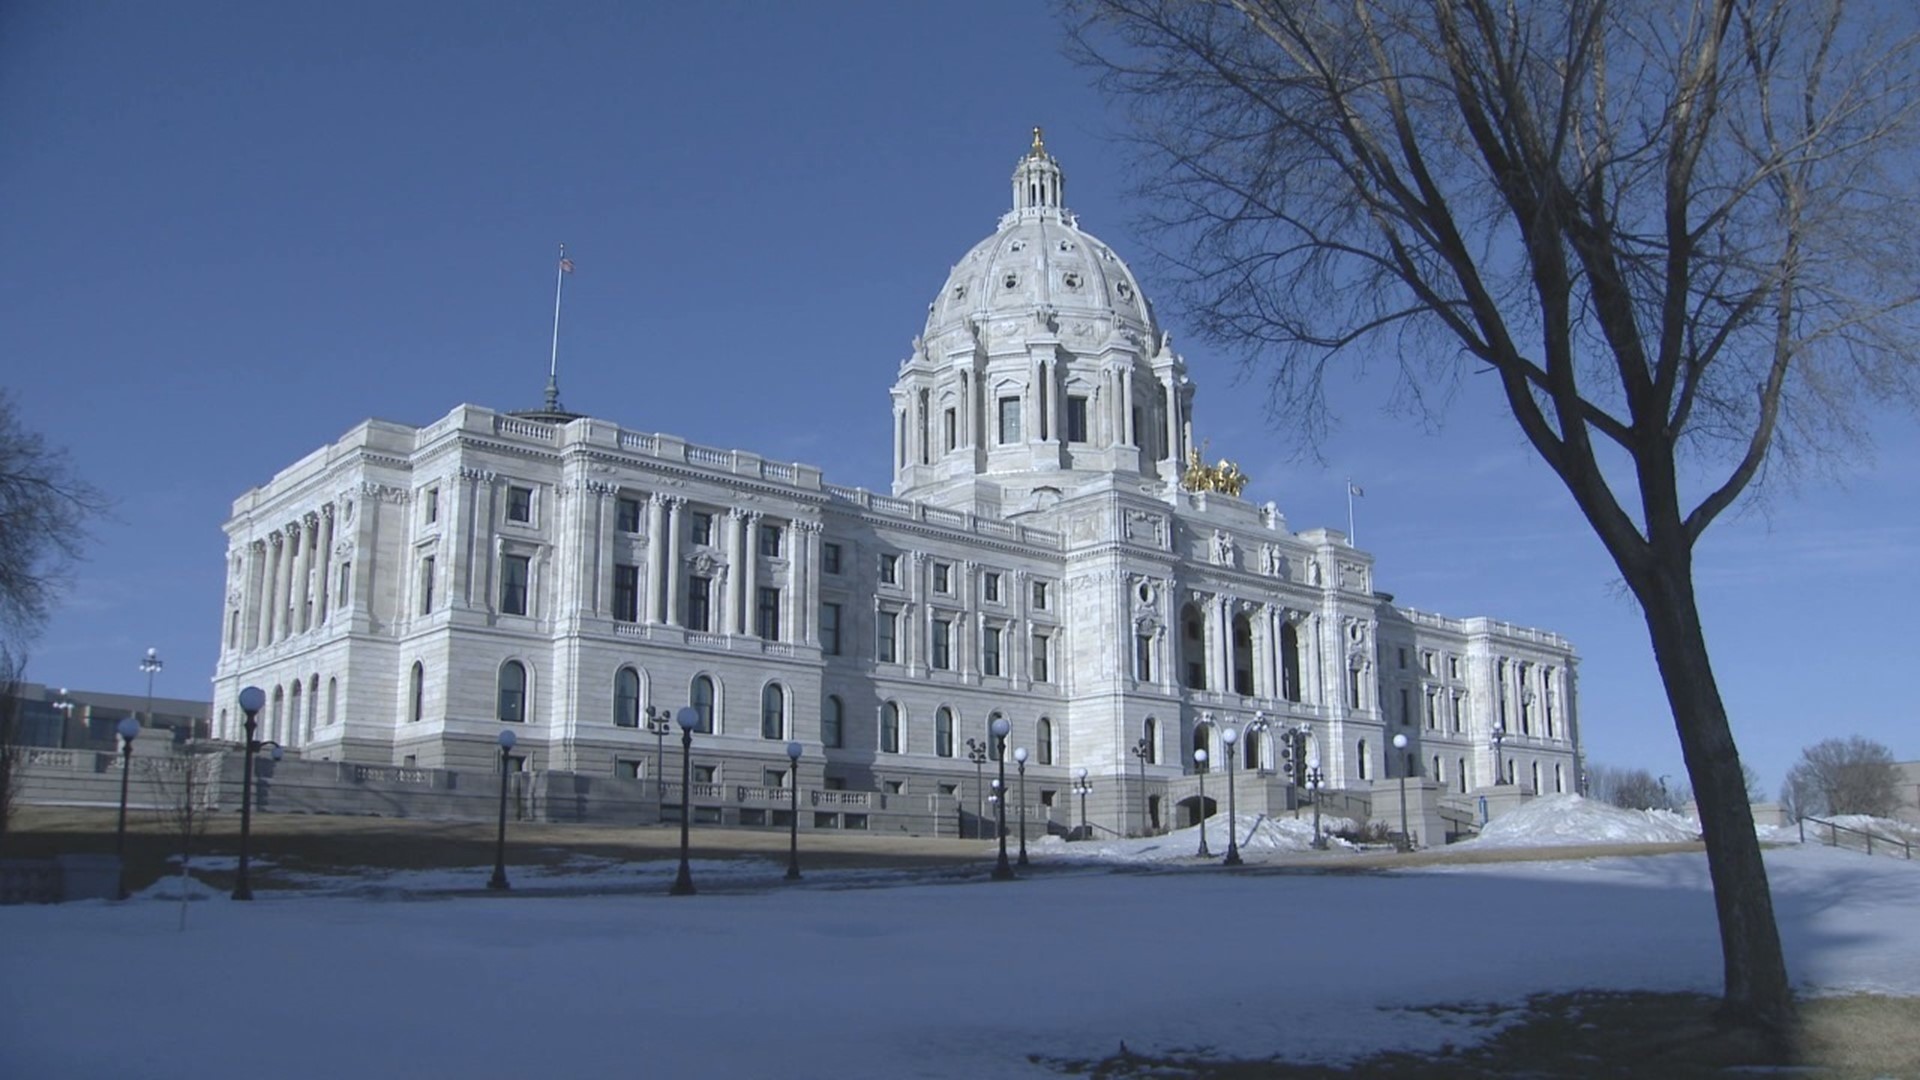 The State of Minnesota will be the backstop for federally-funded services threatened by the federal government's partial shutdown, at least in the short run. Gov. Walz and other state officials tried to reassure Minnesotans that no assistance programs have been cut yet, and no state employees have received layoff notices at this point.